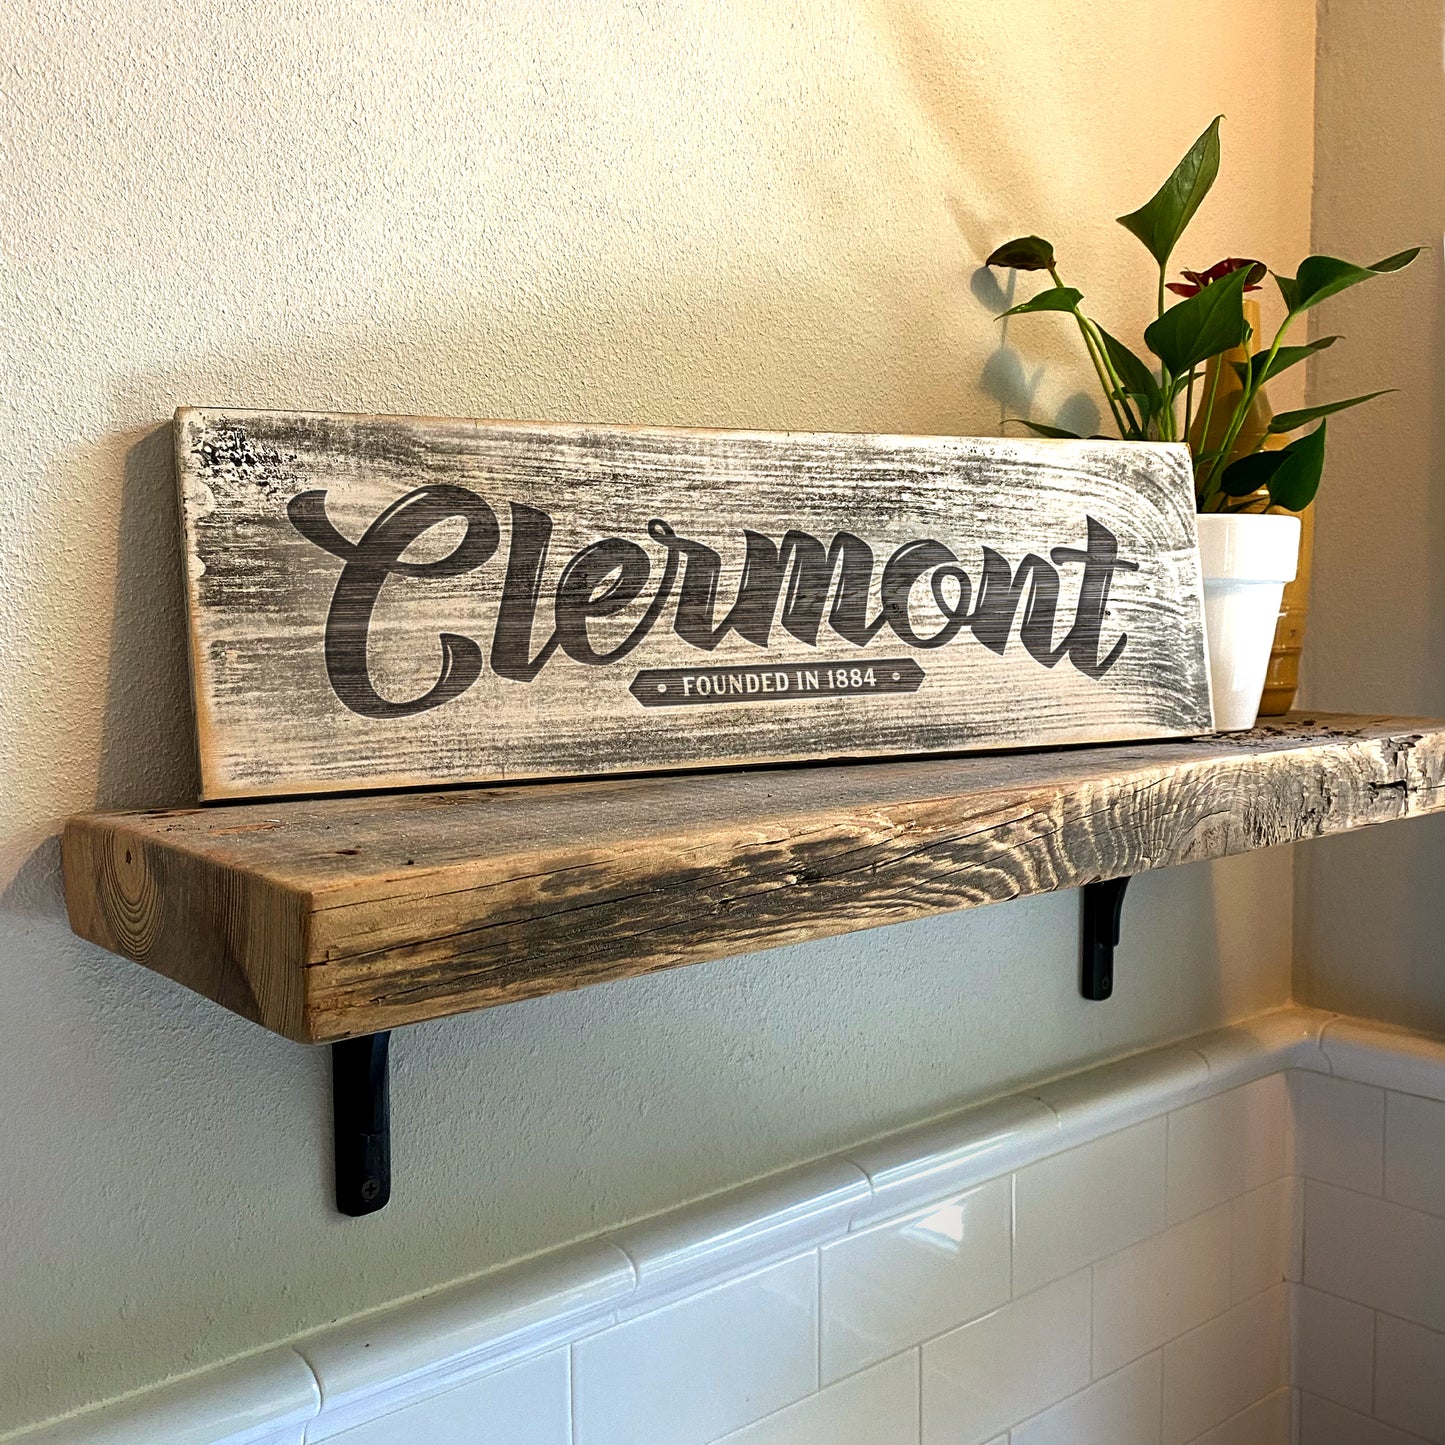 Clermont FL - Handcrafted Artisan Wood Sign